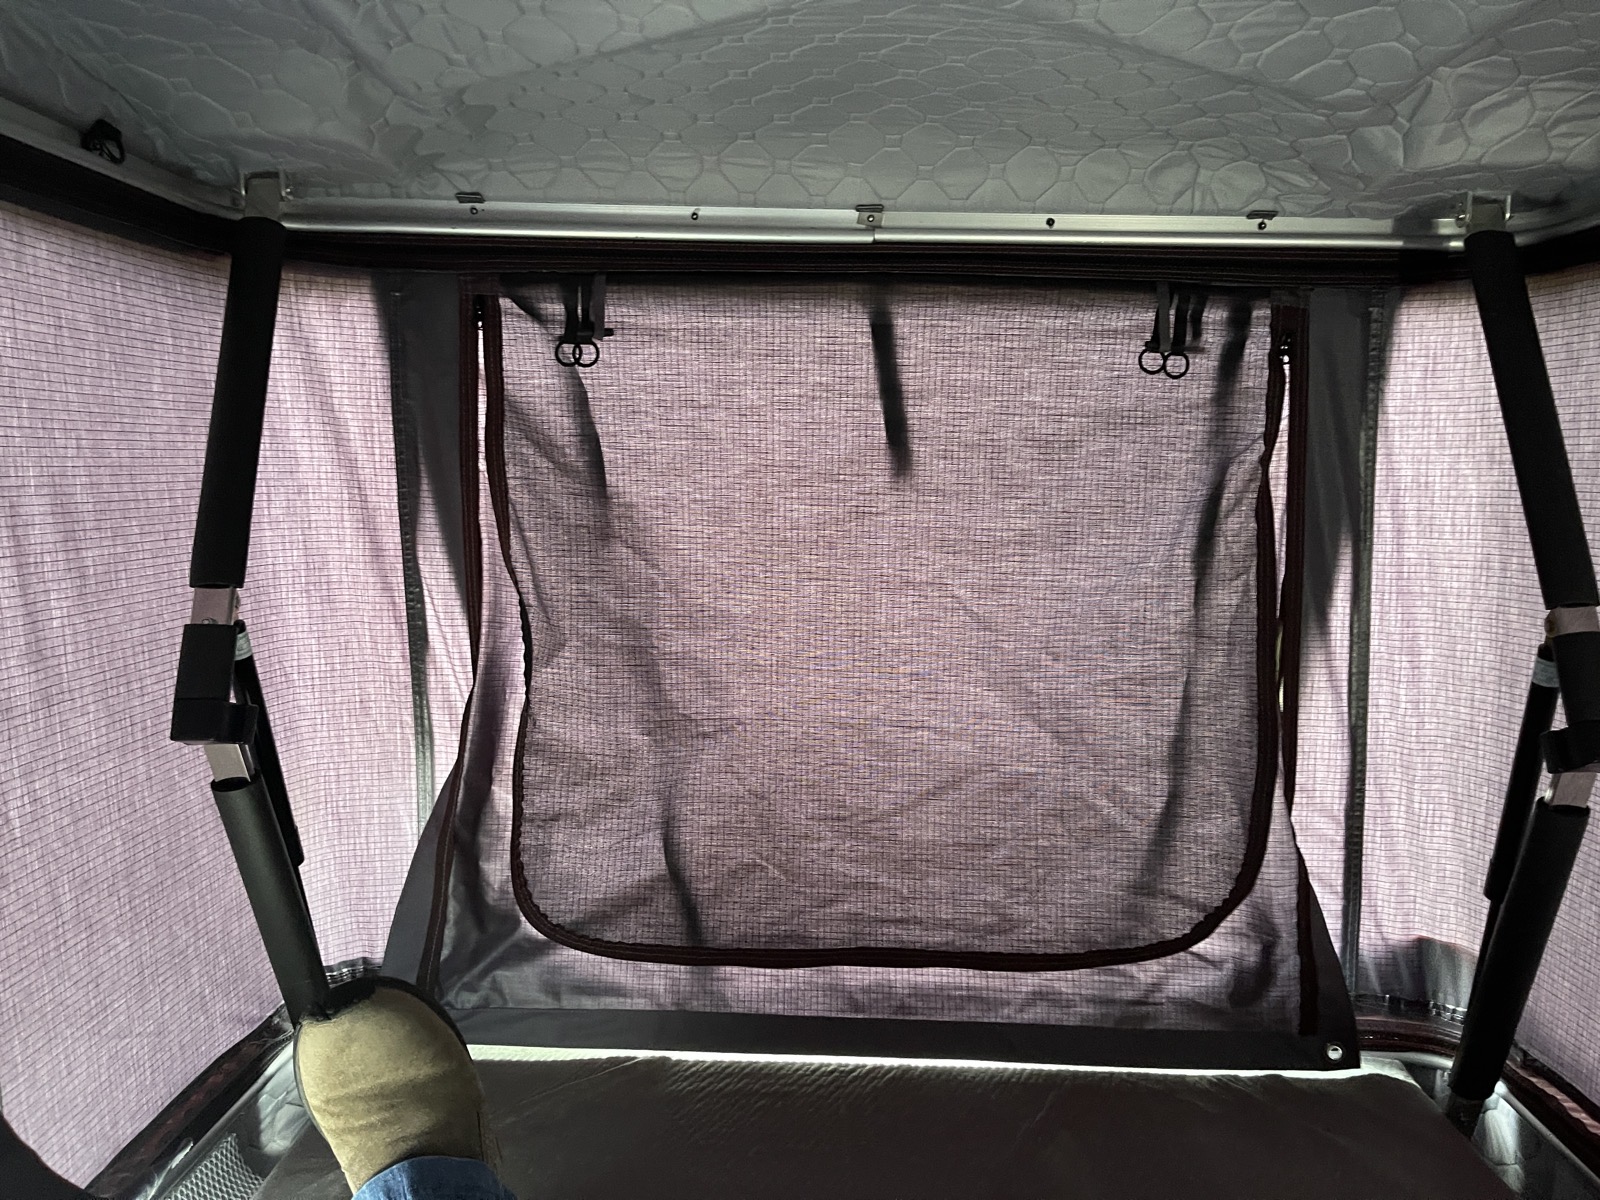 Inside the Roofnest Rooftop Tent basically showing netting